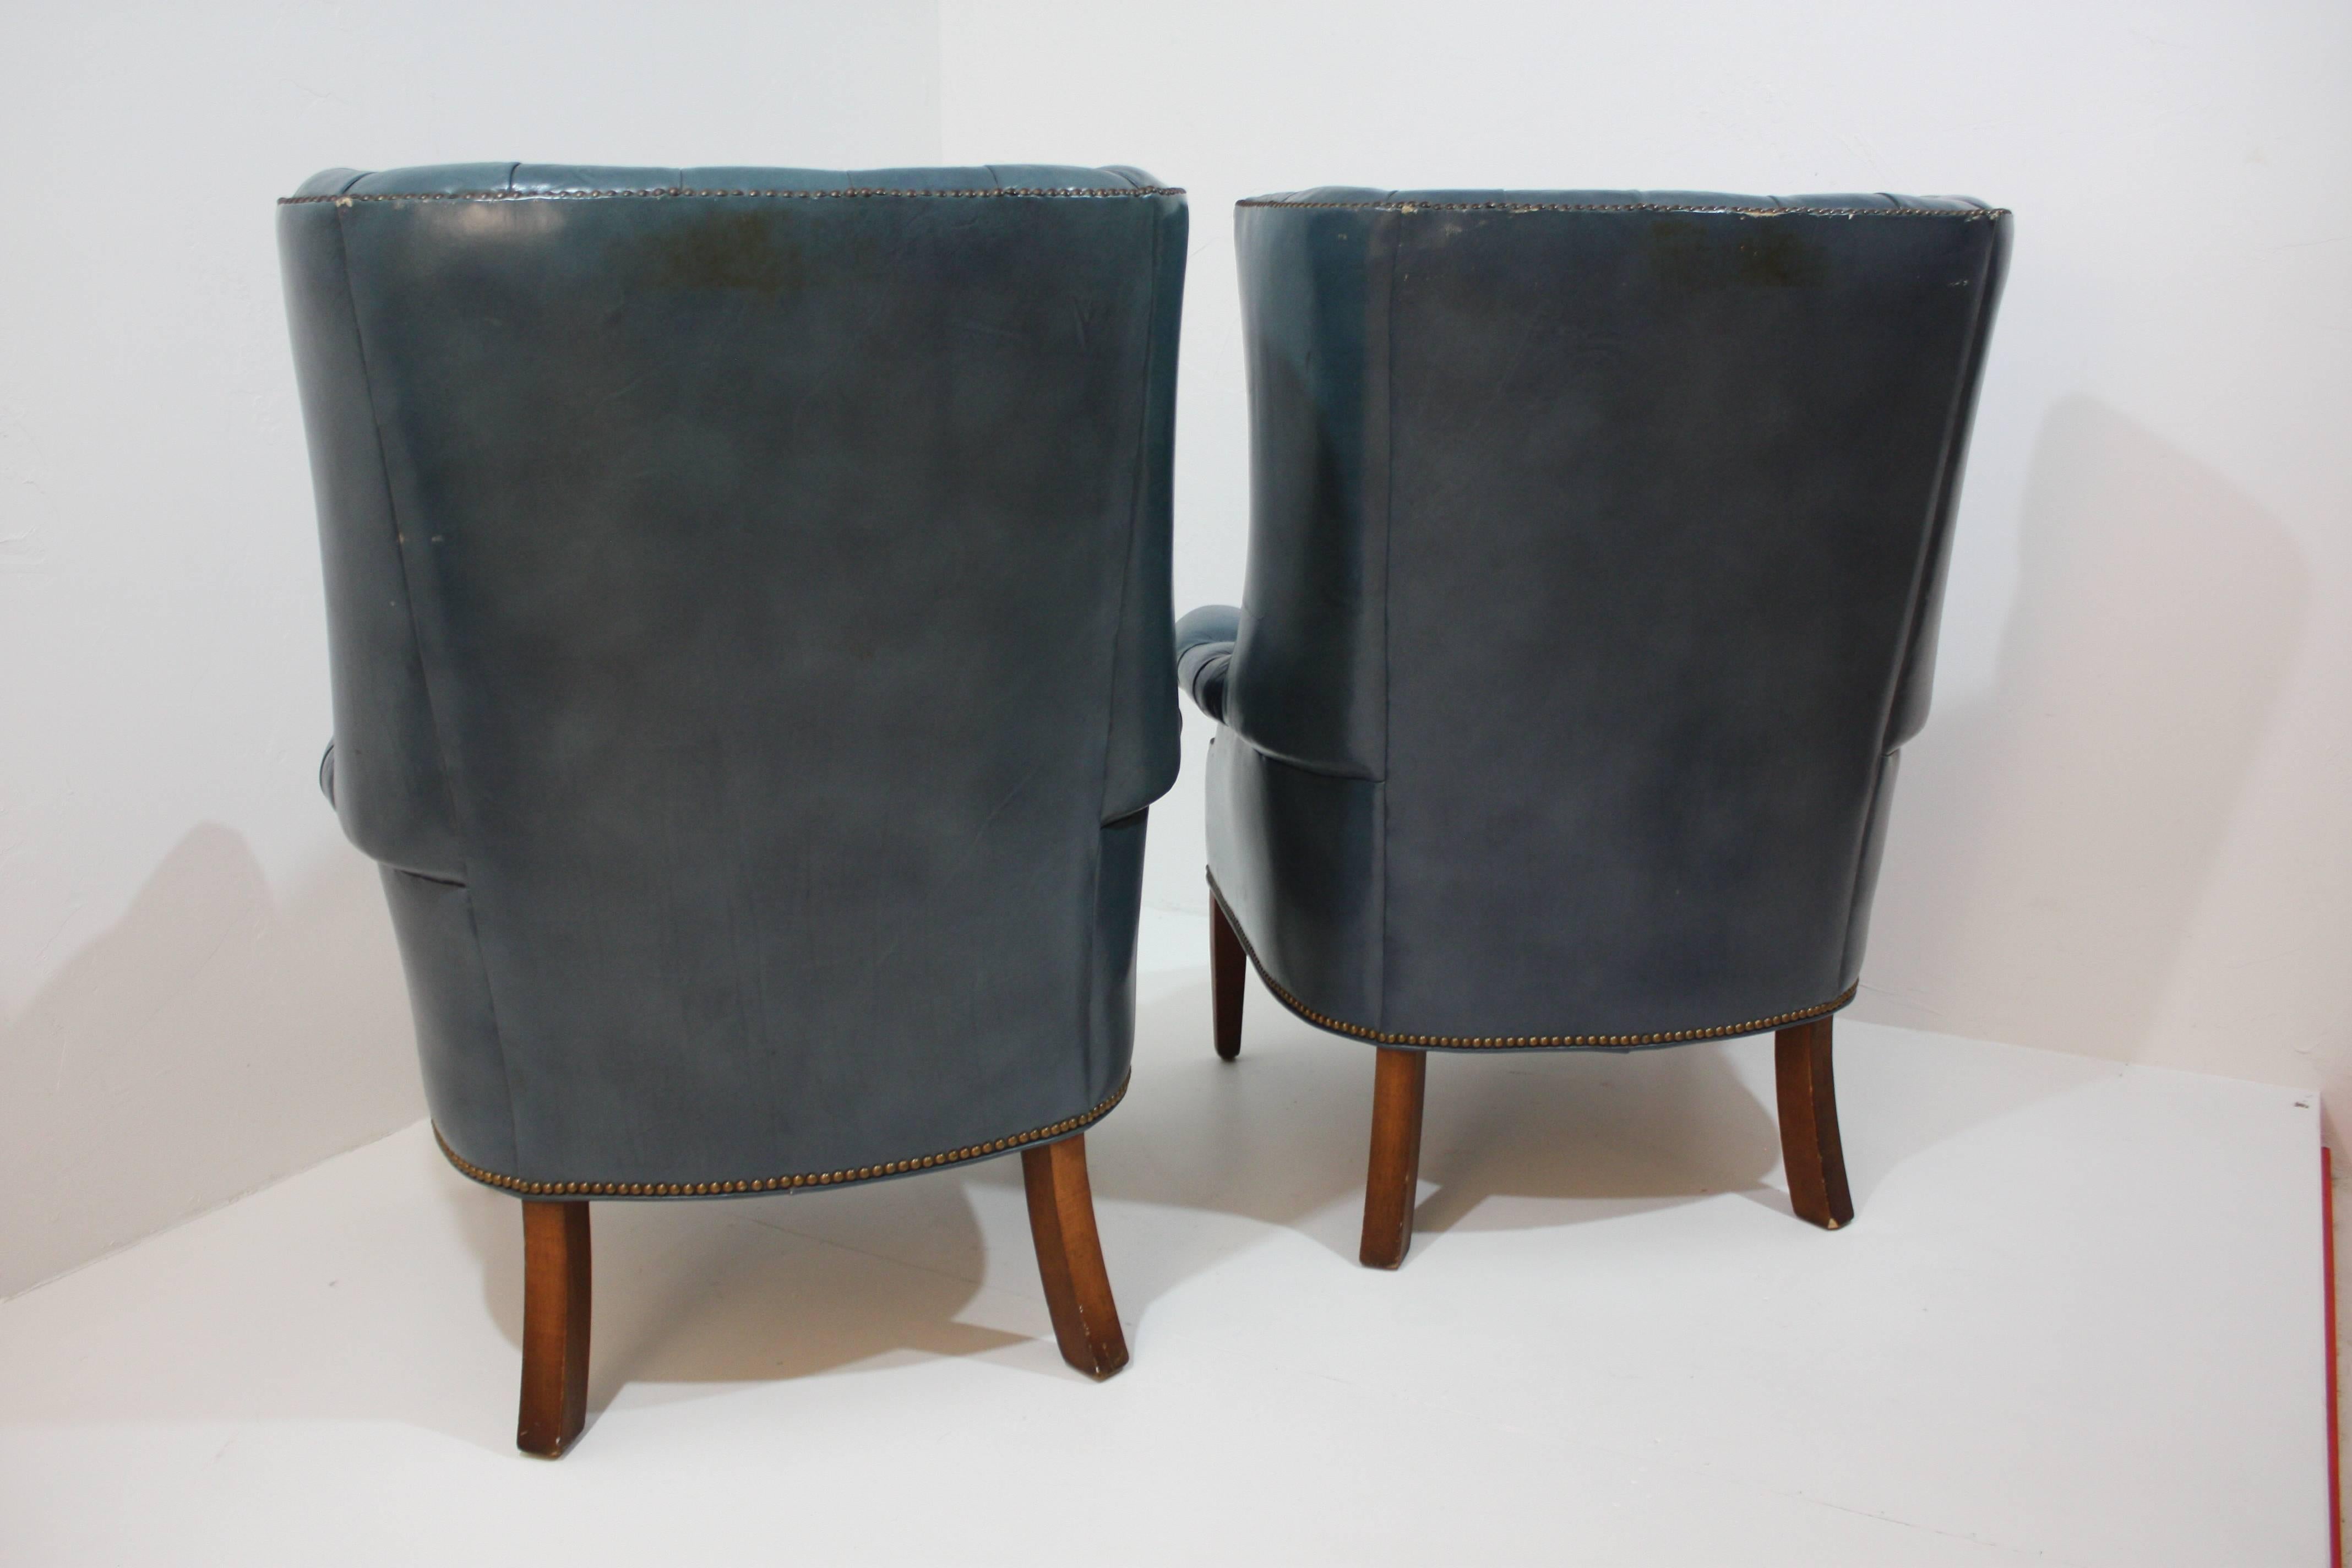 20th Century  Leather Tufted Curved Back Chairs